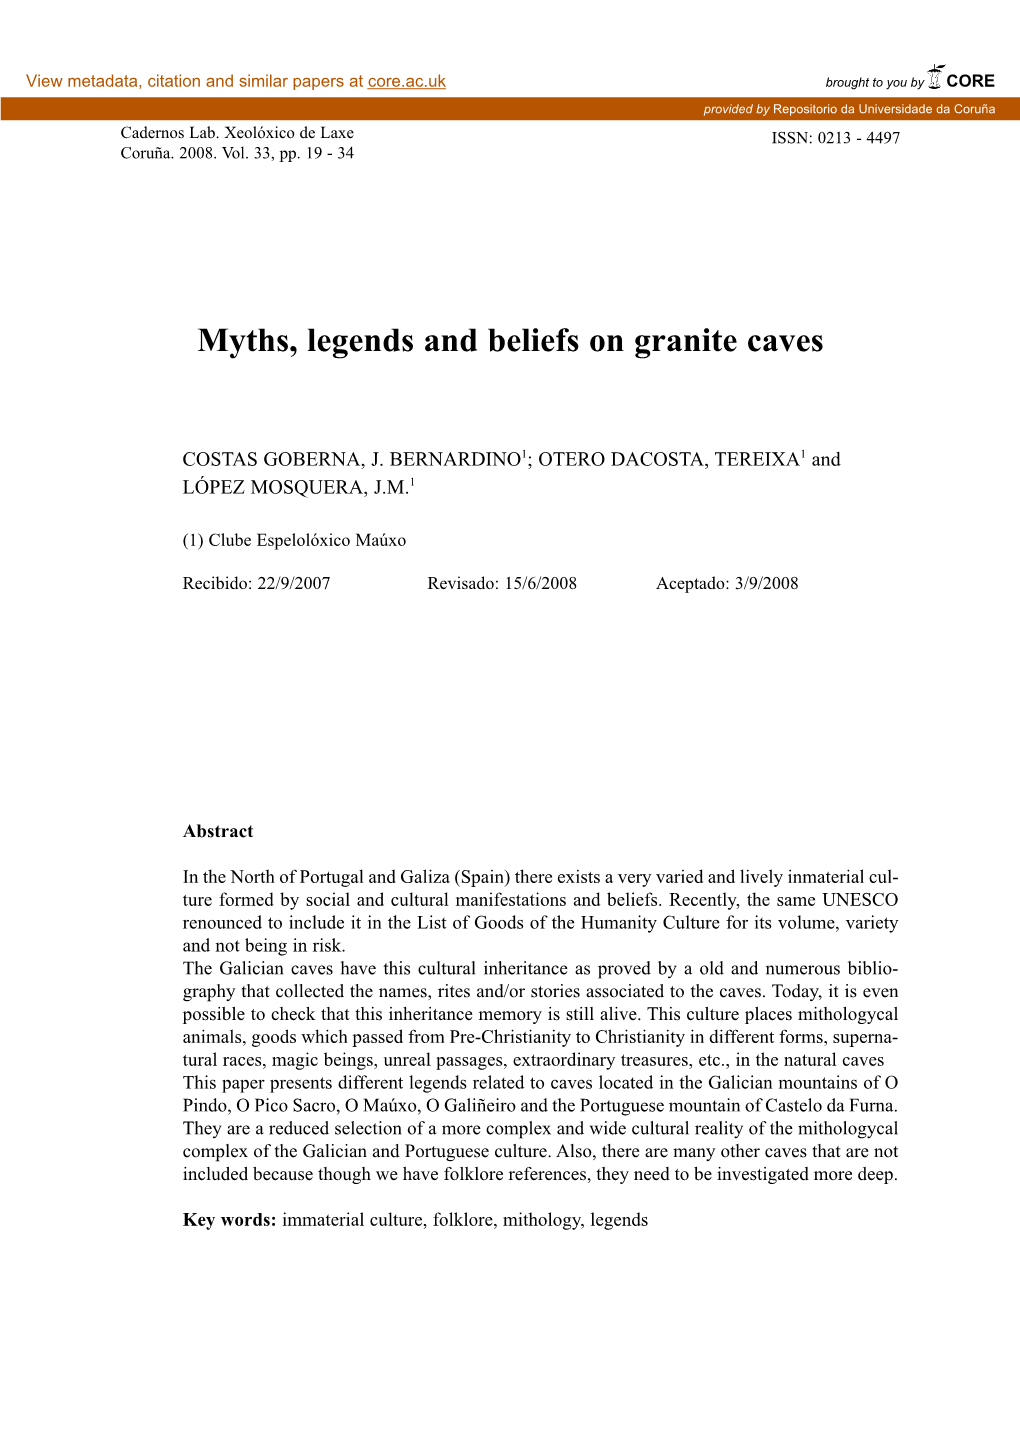 Myths, Legends and Beliefs on Granite Caves